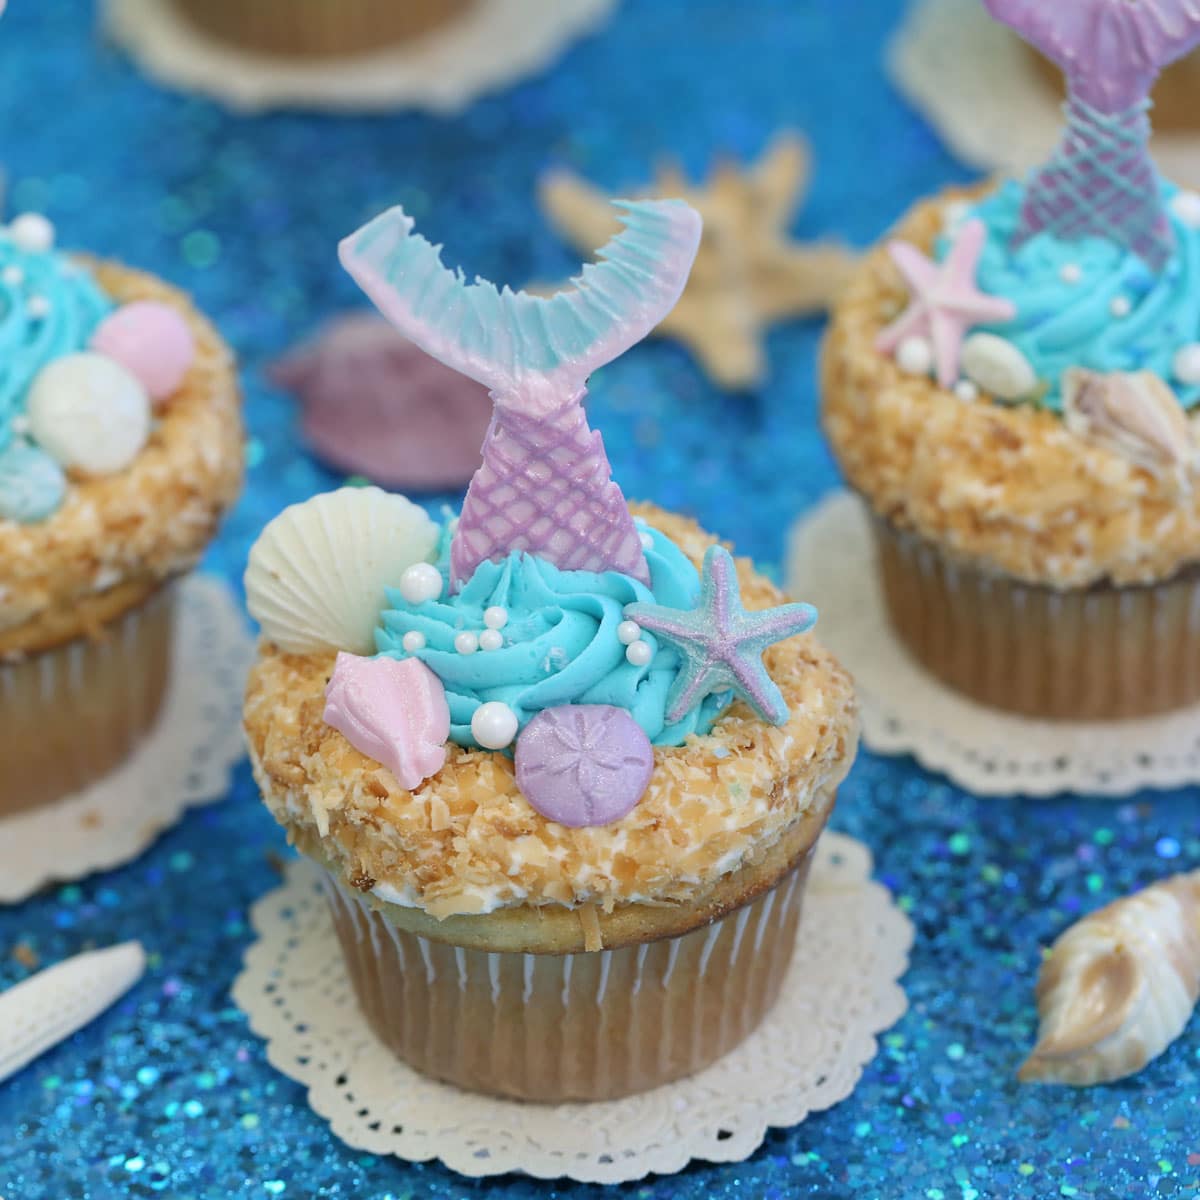 Go Under the Sea With These Little Mermaid Crafts & Recipes! - Inside the  Magic